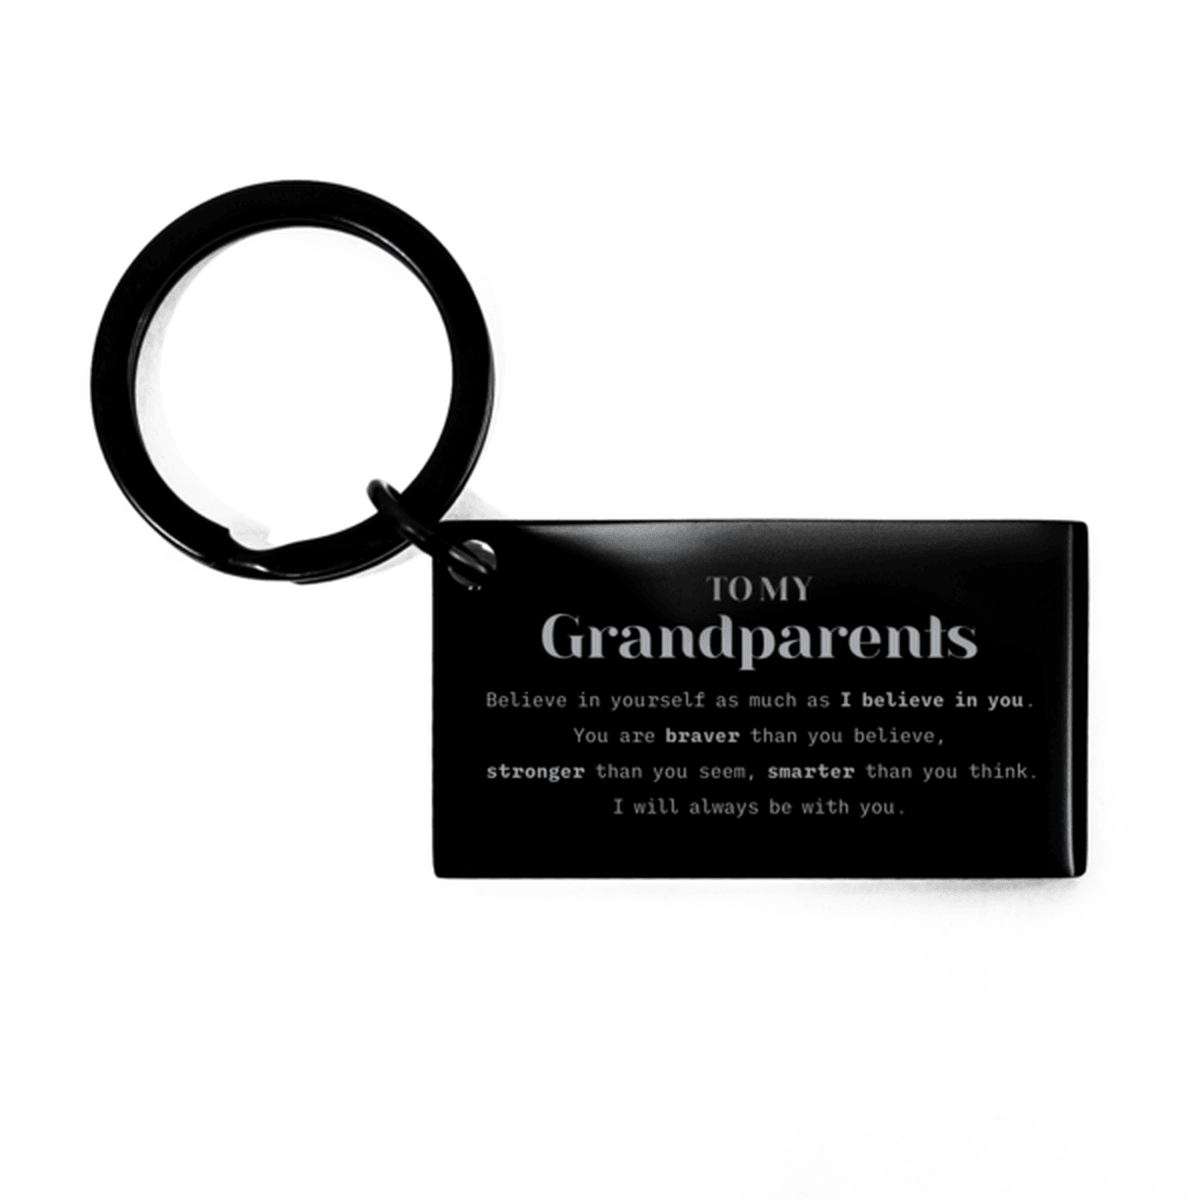 Grandparents Keychain Gifts, To My Grandparents You are braver than you believe, stronger than you seem, Inspirational Gifts For Grandparents Engraved, Birthday, Christmas Gifts For Grandparents Men Women